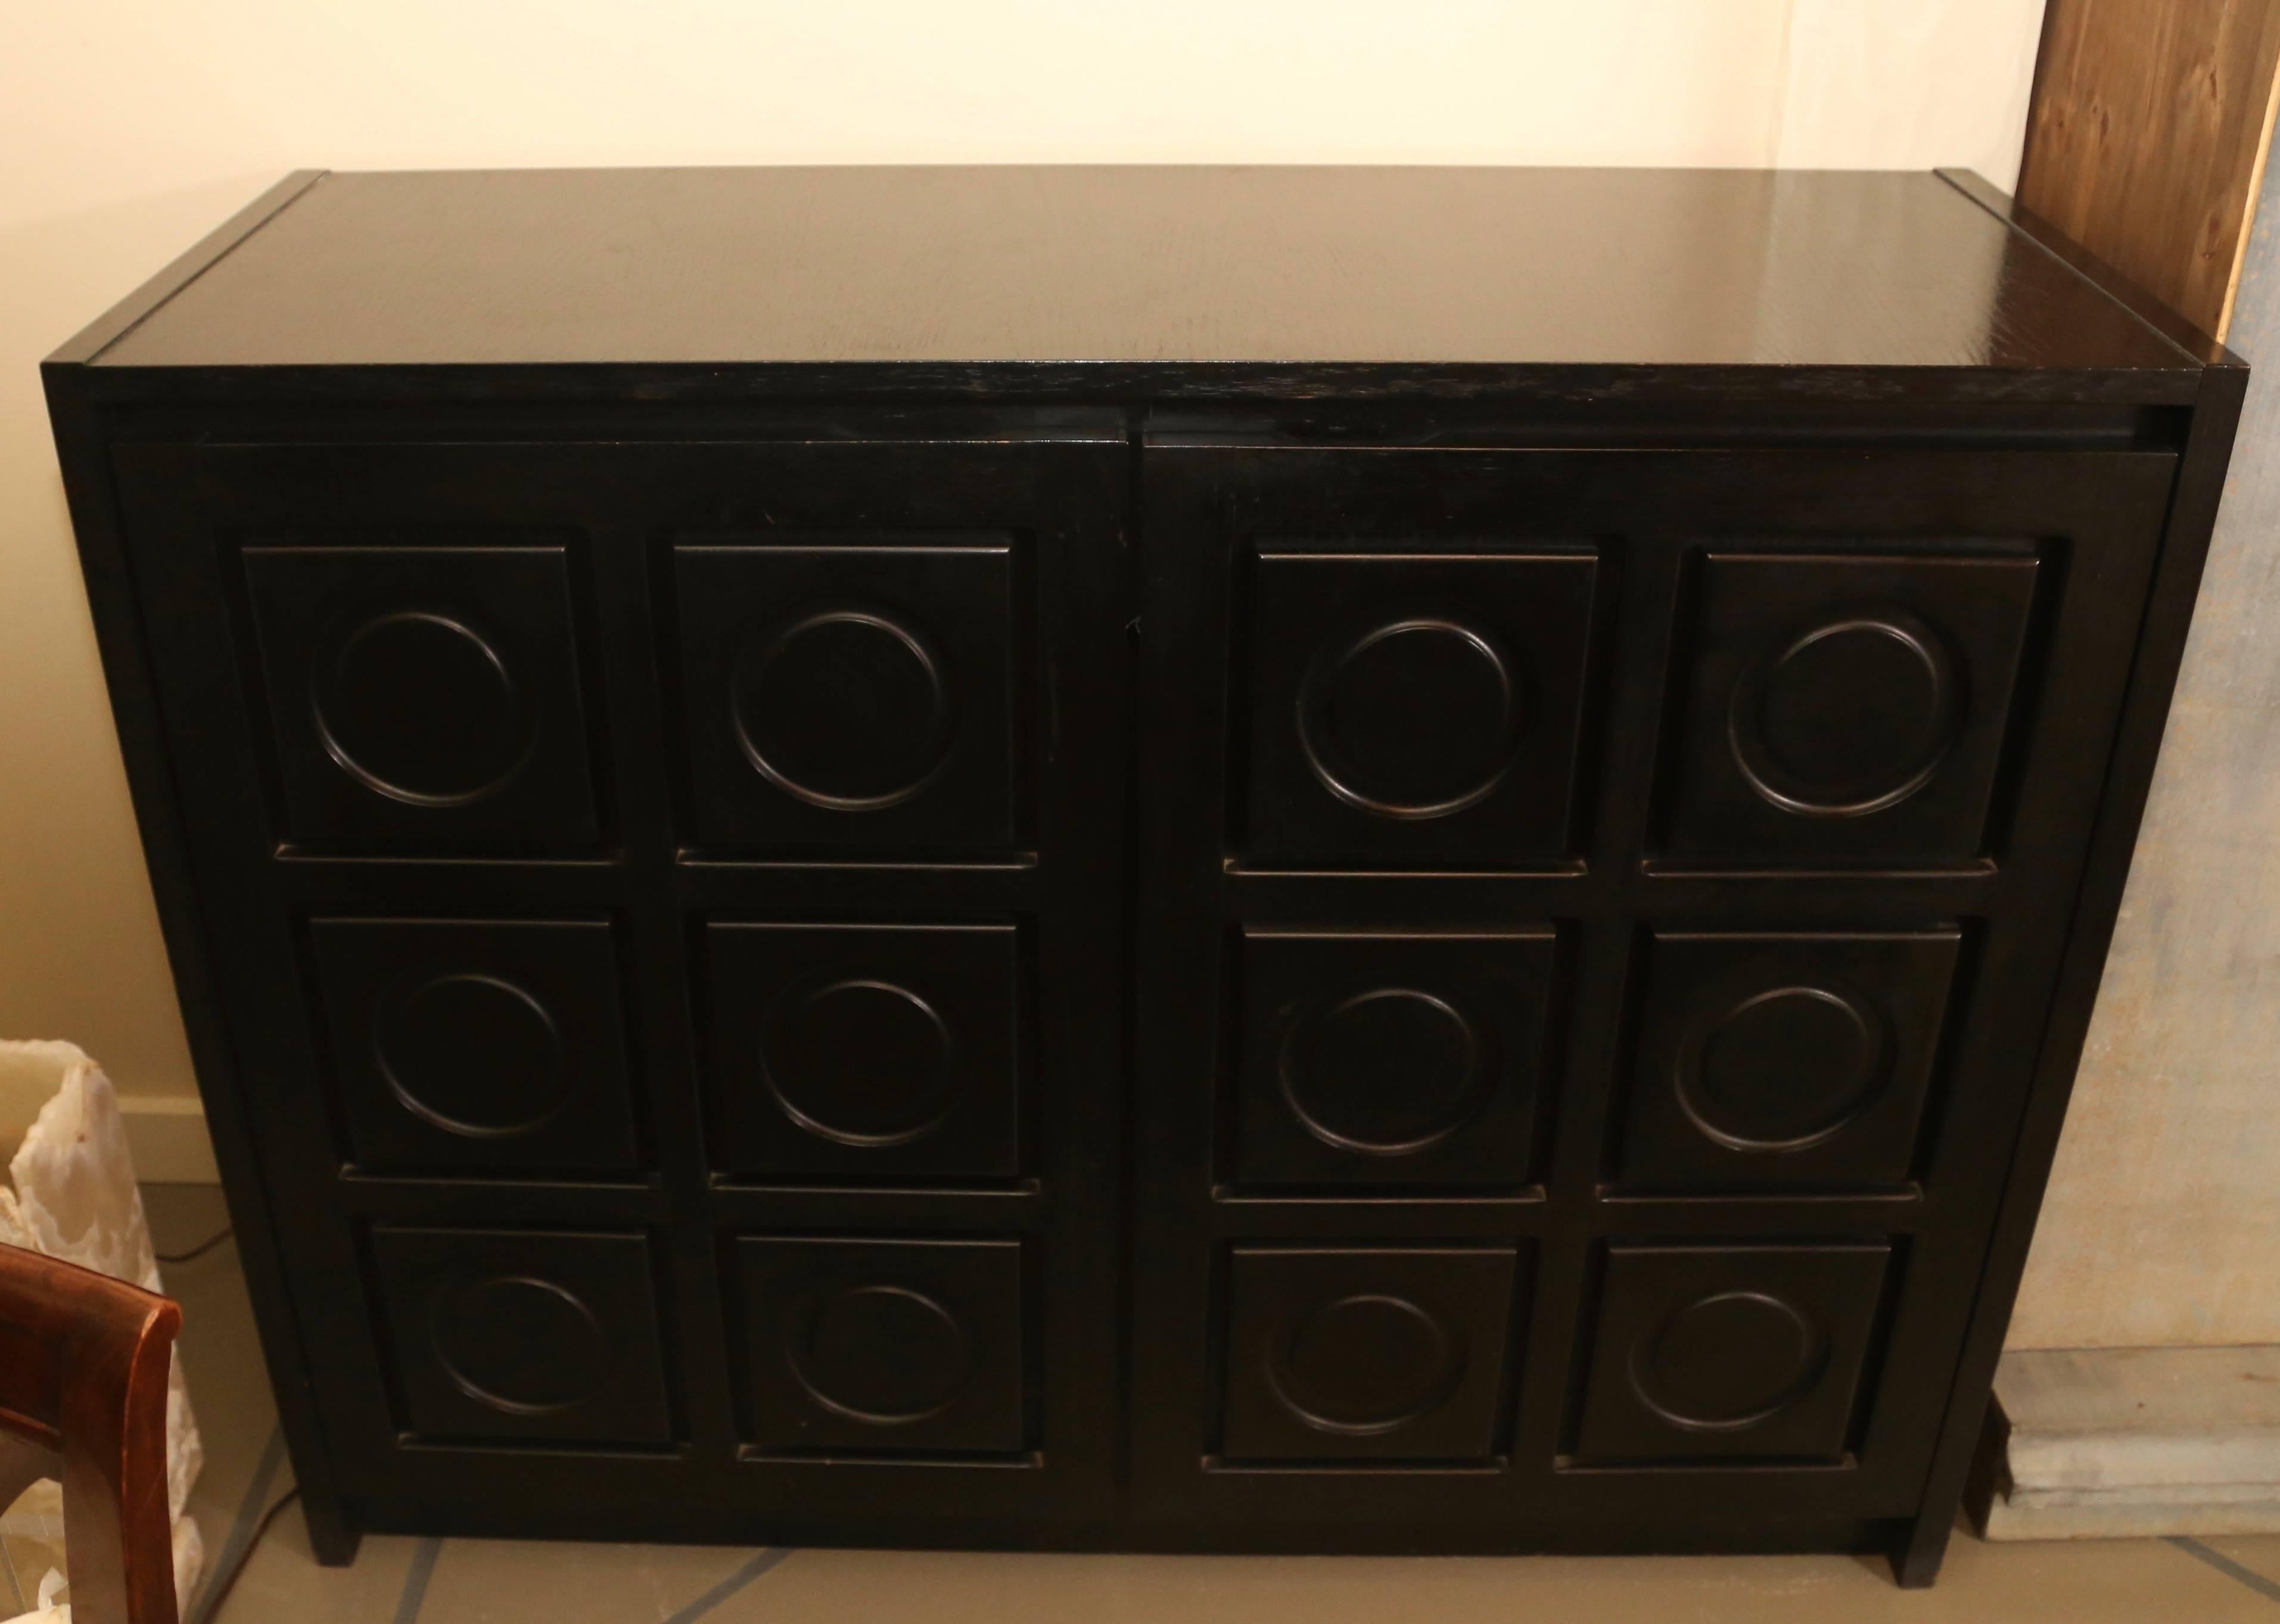 Two-door midcentury cabinet in ebonized oak, with circular motifs carved into the door panels.

Stained oak interior with shelves and drawers. Recessed finger pulls on tops of doors.
  